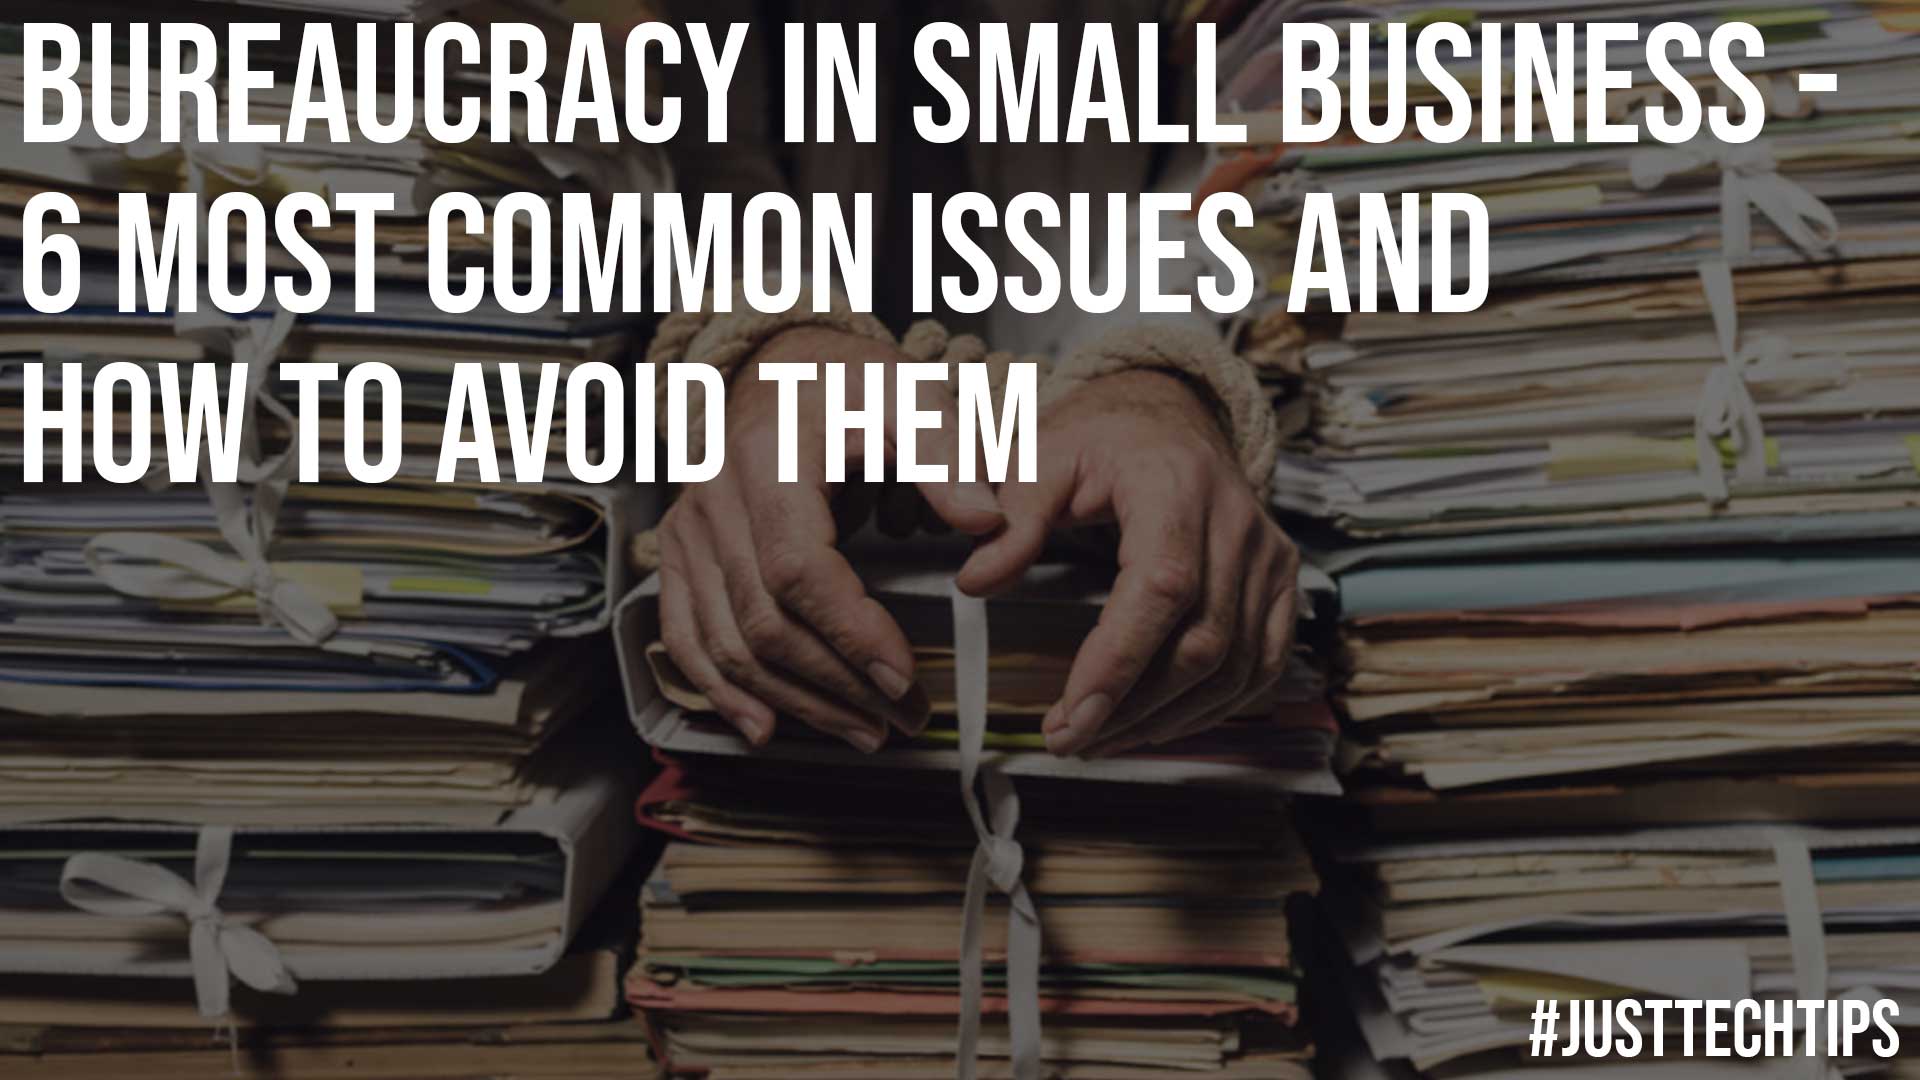 Bureaucracy in Small Business 6 Most Common Issues and How to Avoid Them